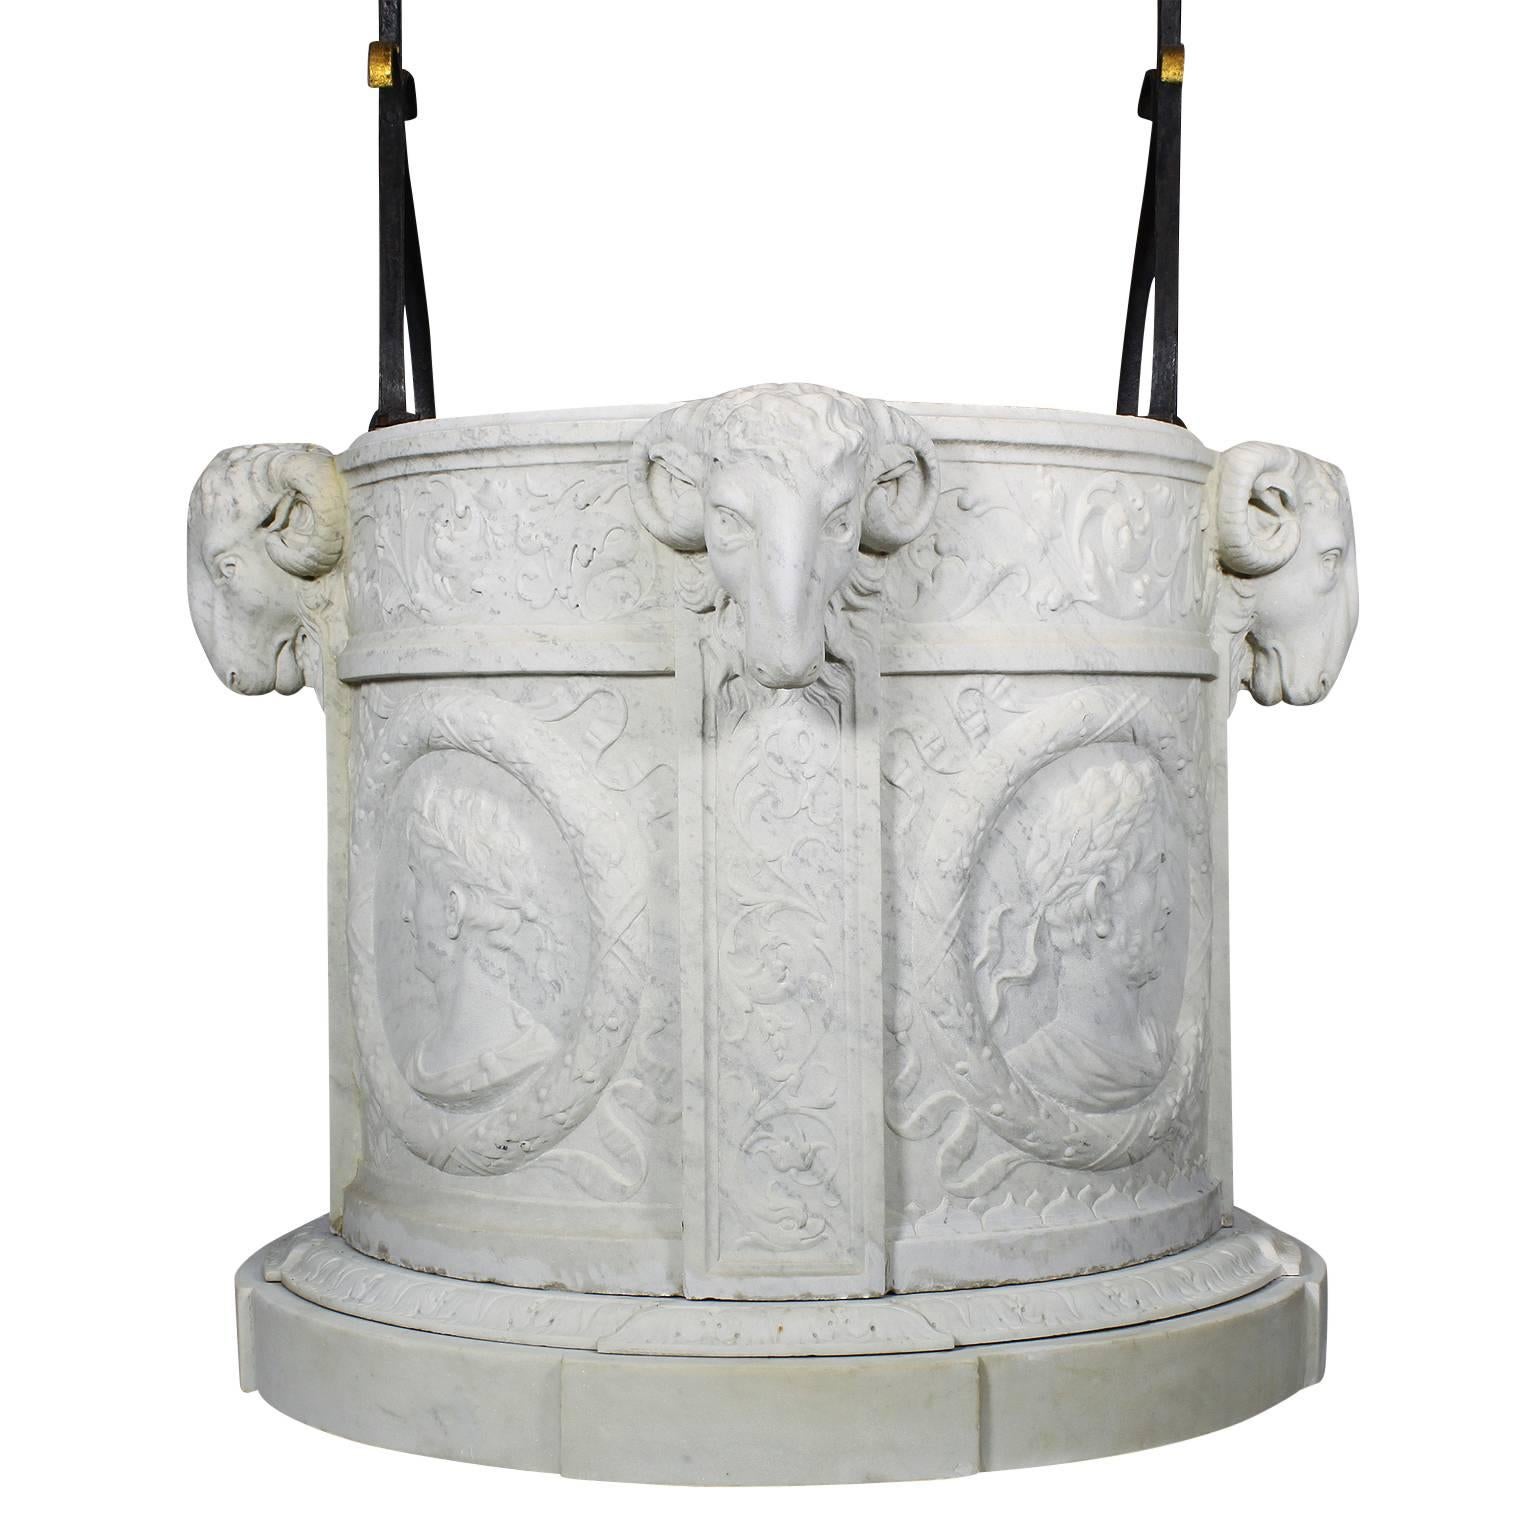 A fine Italian 19th century carved Carrara marble and wrought iron wishing well head (It may also be used as a planter). The white marble cylinder surmounted with a parcel-gilt wrought iron and toleware arched frame decorated with flower heads, the